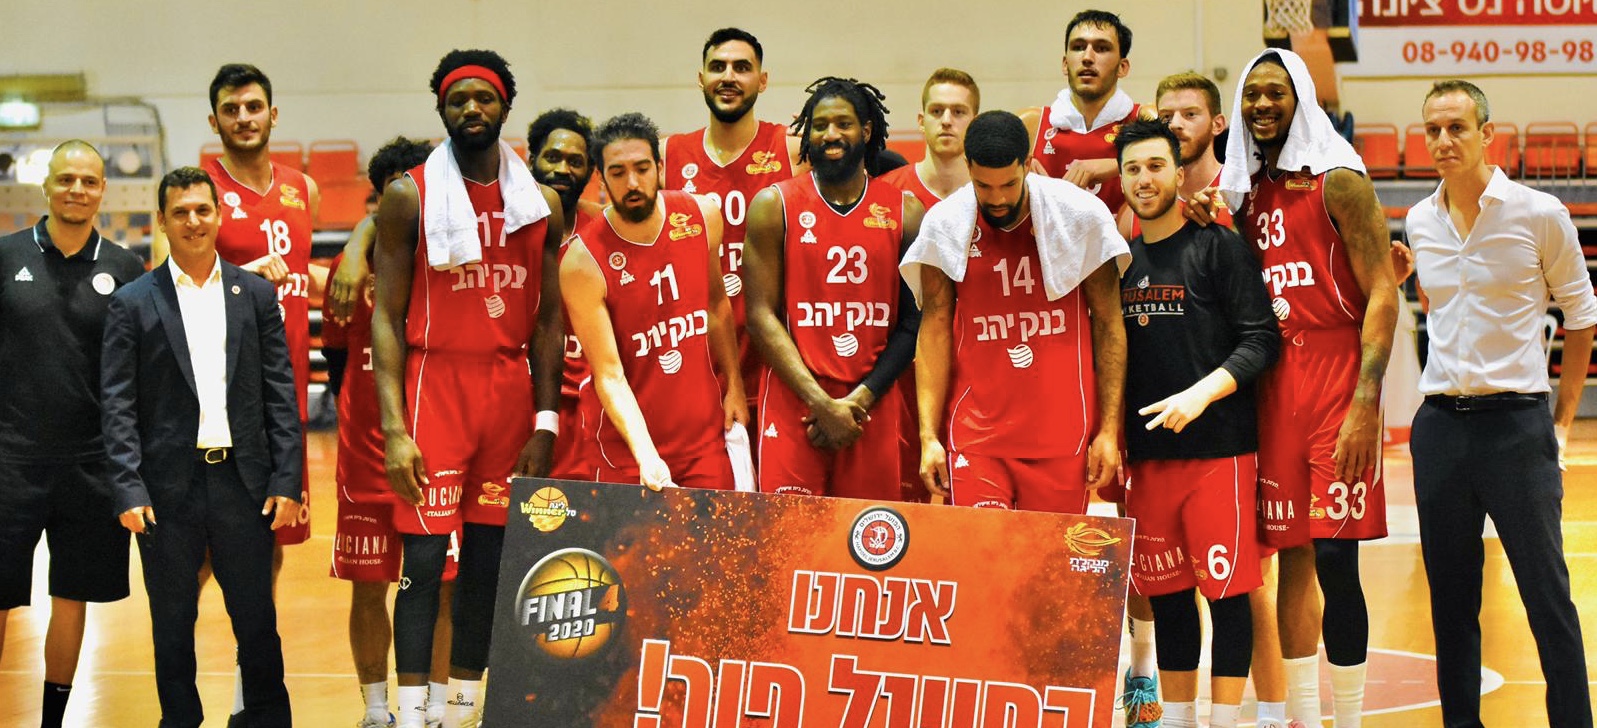 Game Report: Jerusalem drops Nes Ziona 114-87; Rishon Le’Zion dispose of Haifa 101-82 as the squads will meet in the Final Four